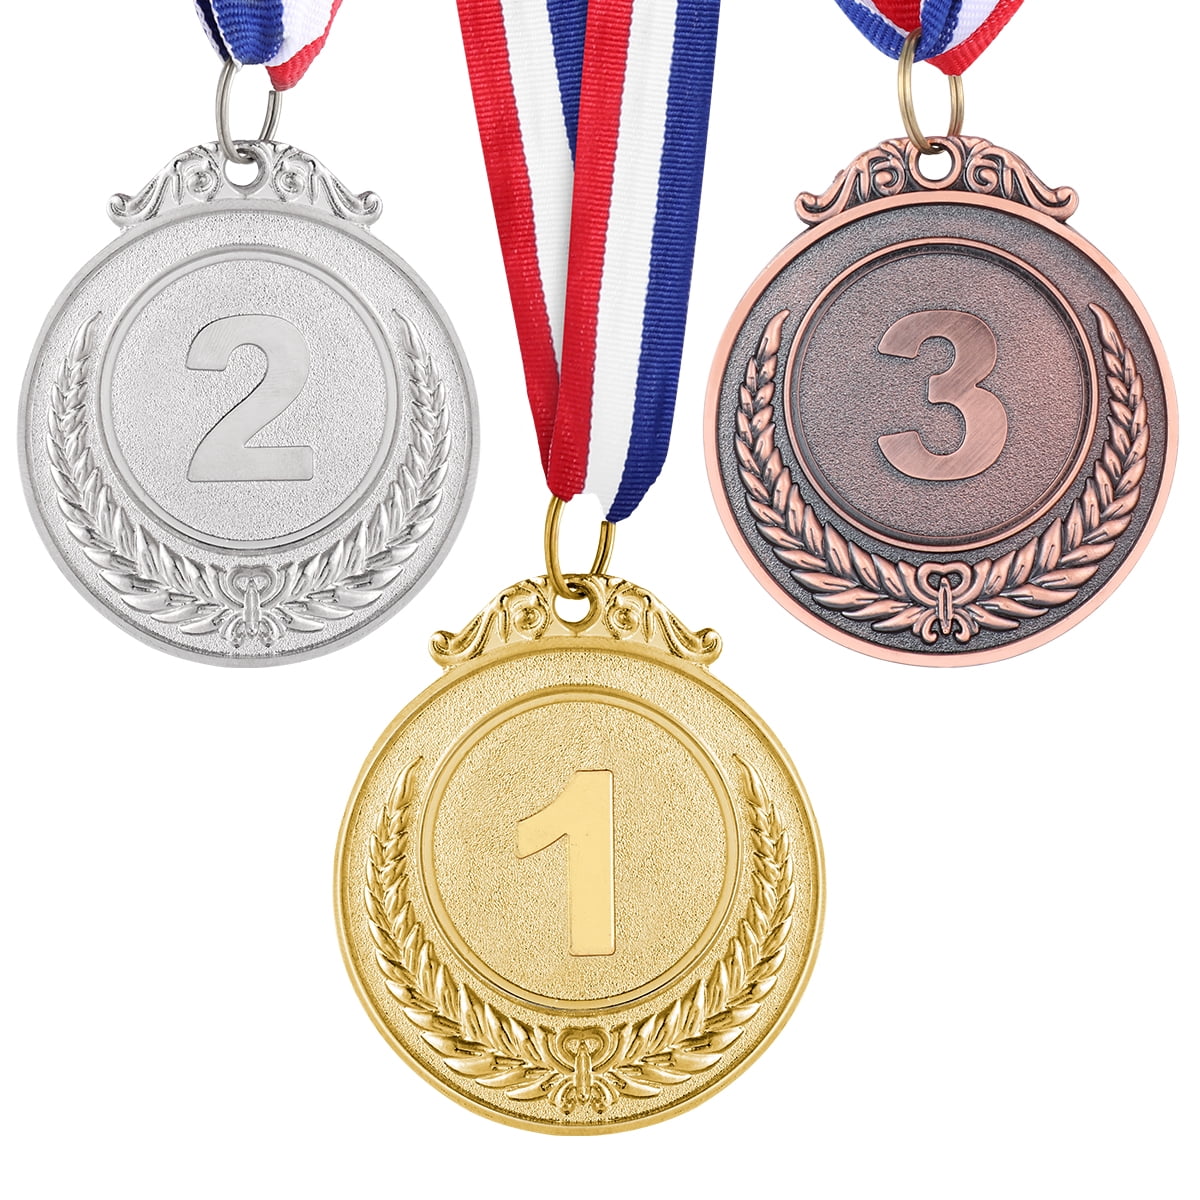 GOLD,SILVER & BRONZE-FREE ENGRAVING,CENTRES & RIBBONS 40mm 3 x BASKETBALL MEDALS 